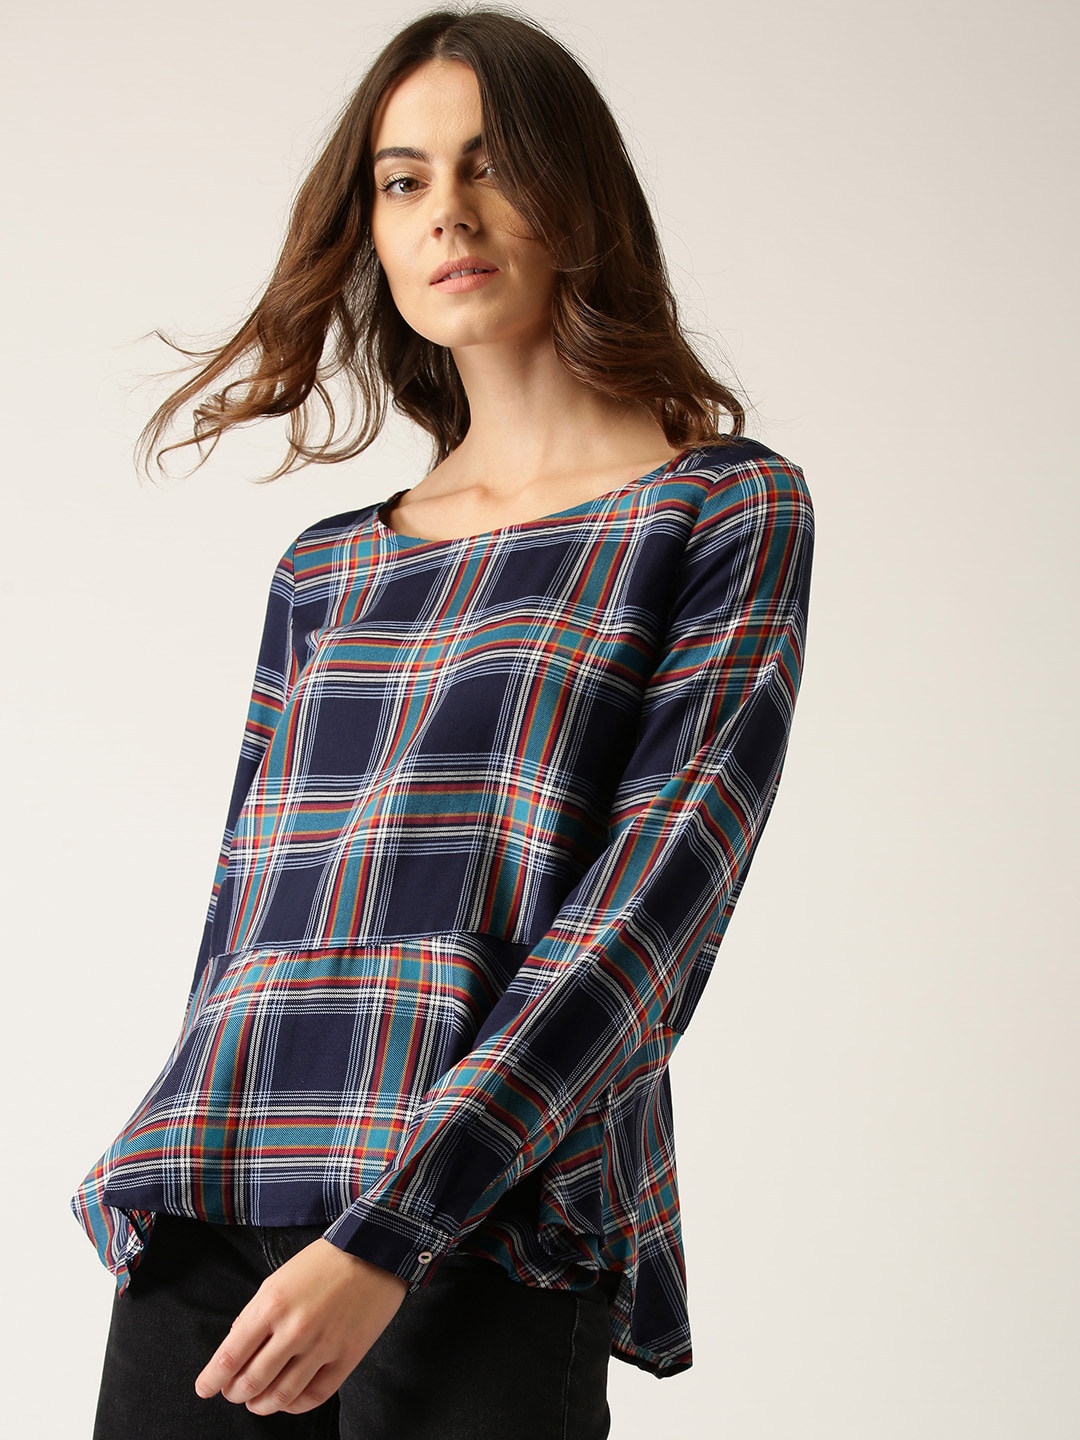 ESPRIT Women Navy Blue & White Checked A-Line Top Price in India